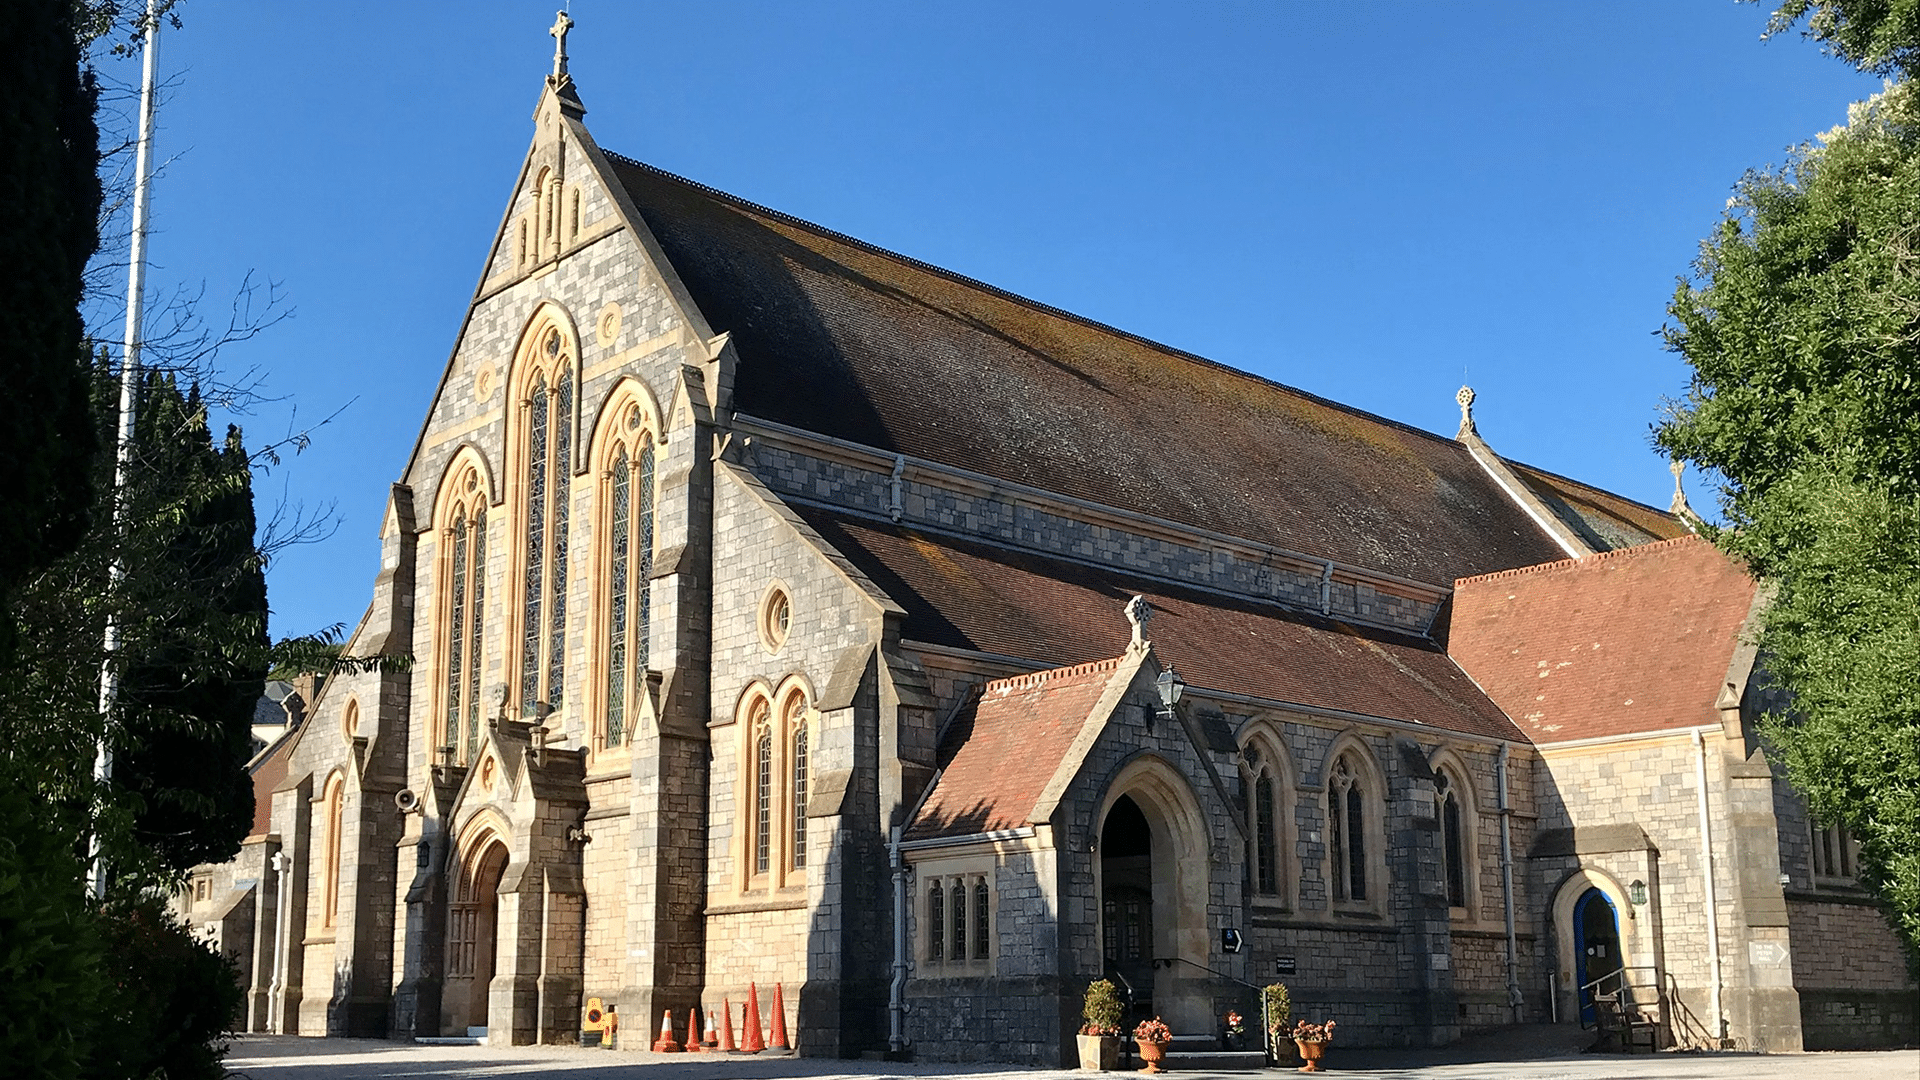 External of St Peter's Church in Budleigh. Large traditional church with high roof, limestone walls, and stained glass windows, built in 1893